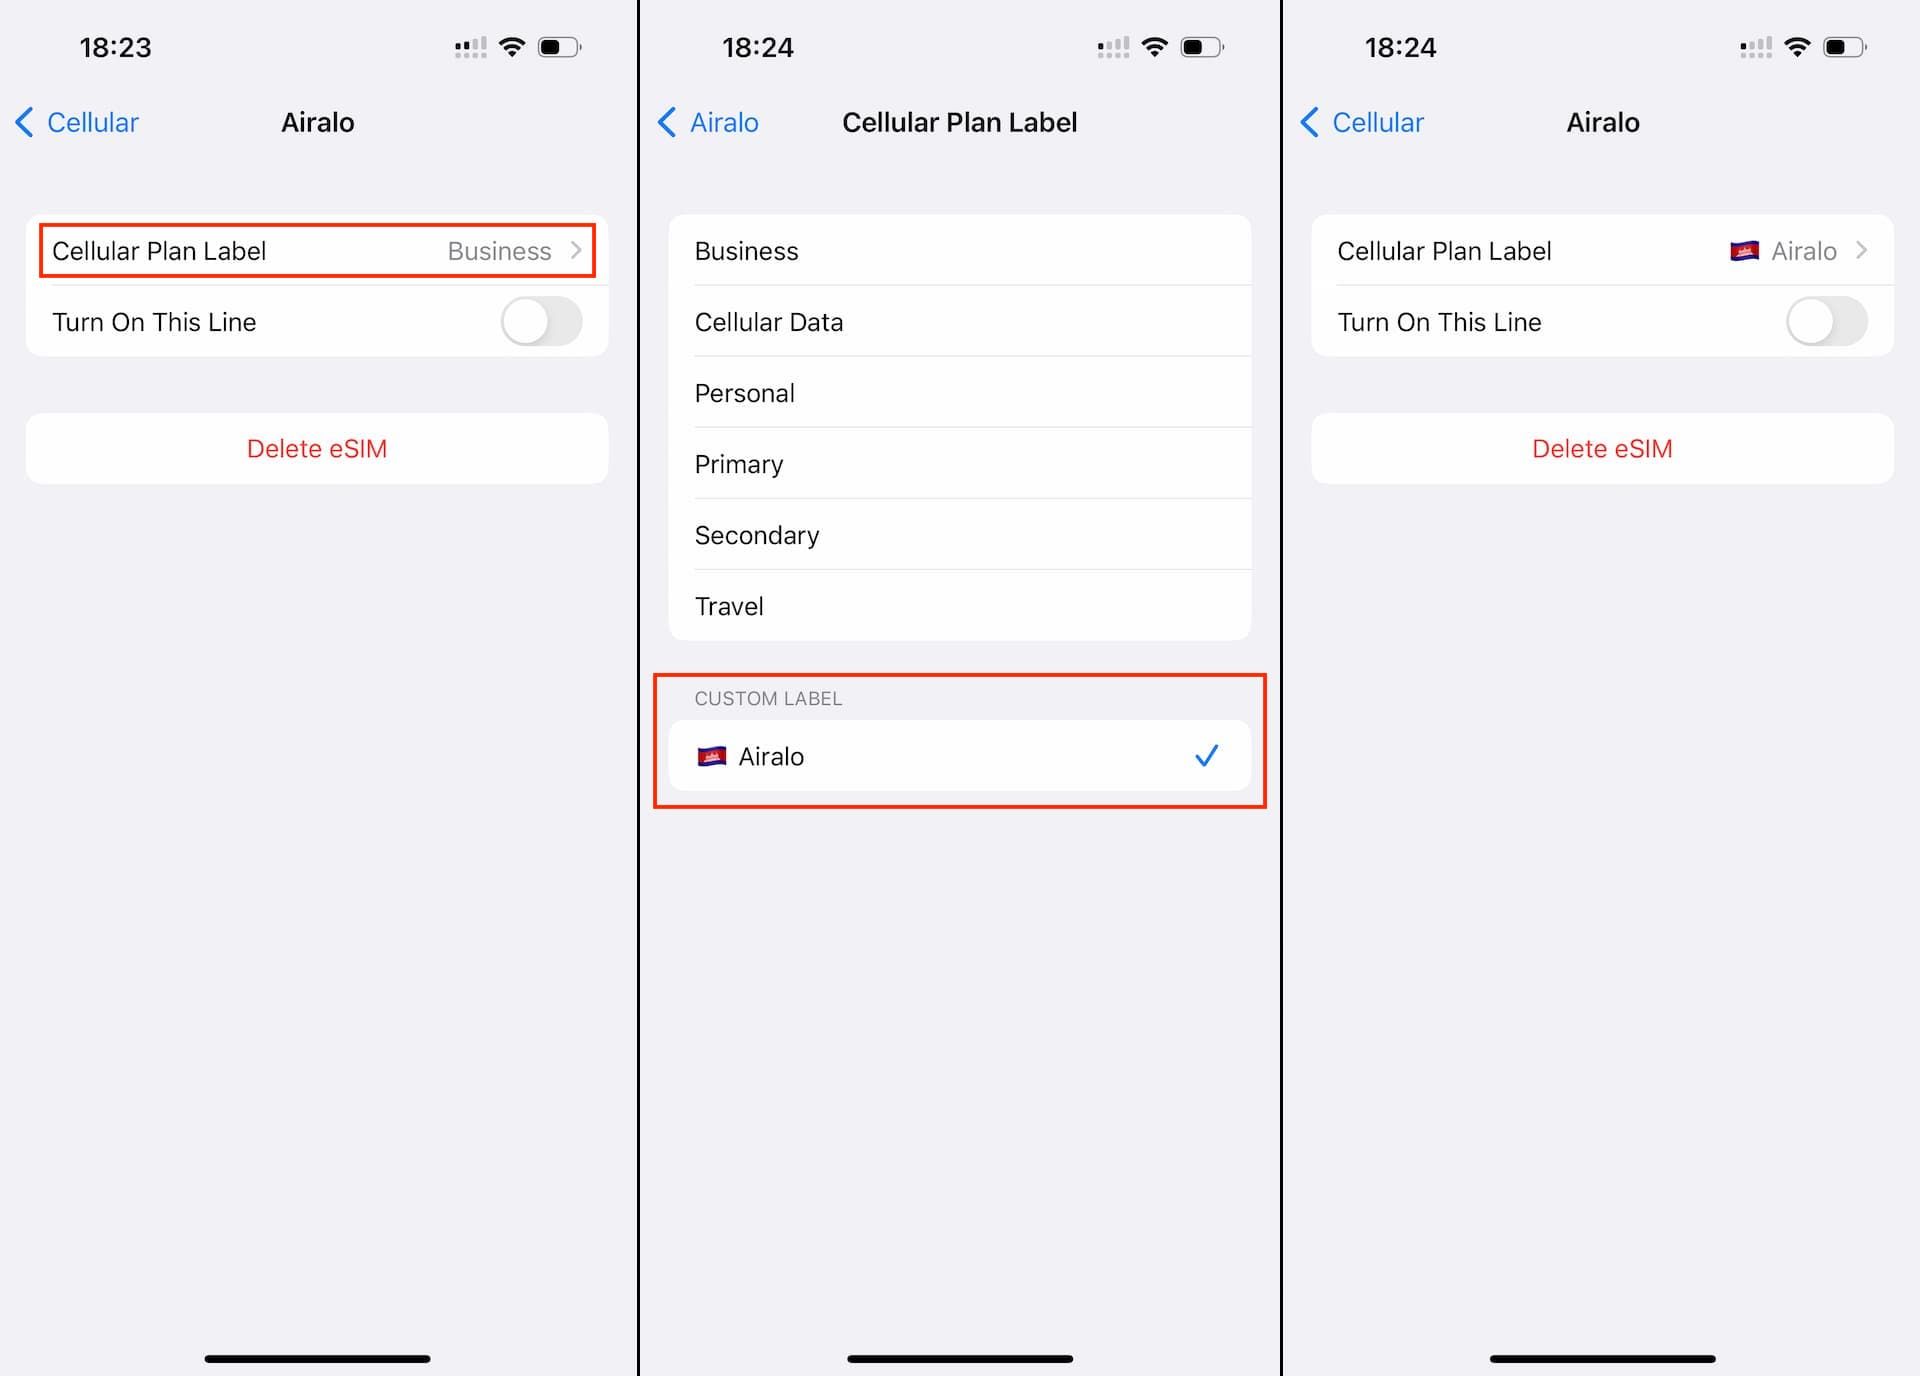 How To Activate an eSIM with Activation Code and SM-DP+ Address on iPhone